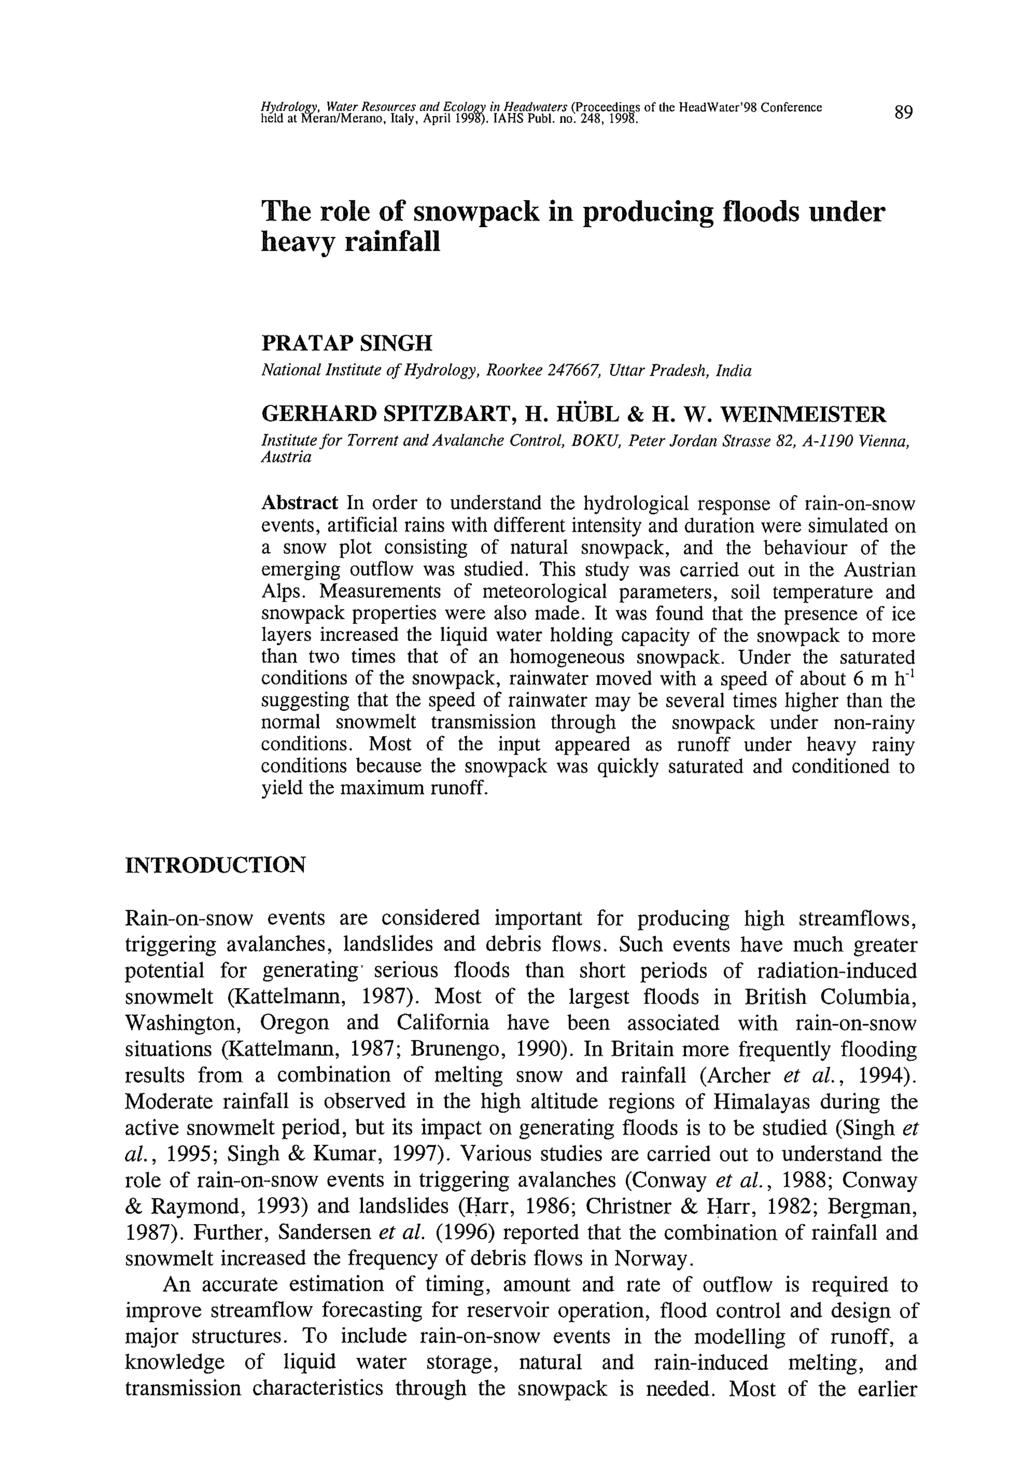 Hydrology, Water Resources and Ecology in Headwaters (Proceedings of the HcadWater'98 Conference held at Itféran/Merano, Italy, April 1998). IAHS Publ. no. 248, 1998.